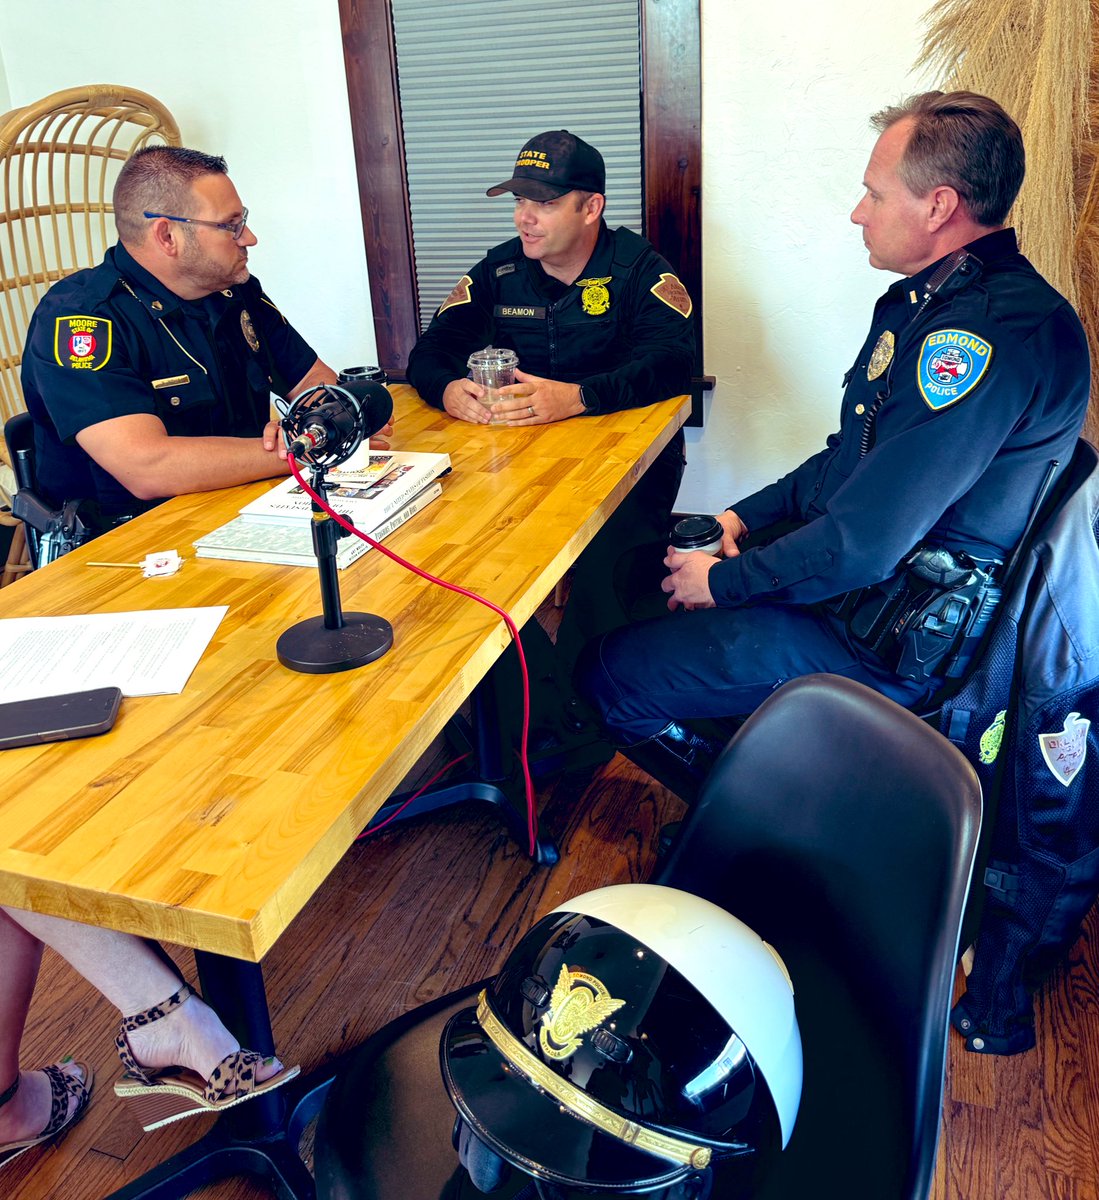 We’re talking Motorcycle Safety this morning with the Oklahoma Highway Safety Office, @EdmondPD, and @OHPDPS. Drive safe and stay tuned for more in the coming weeks. #moorestrong #motorcycle #motorcyclesafety #drivesmart